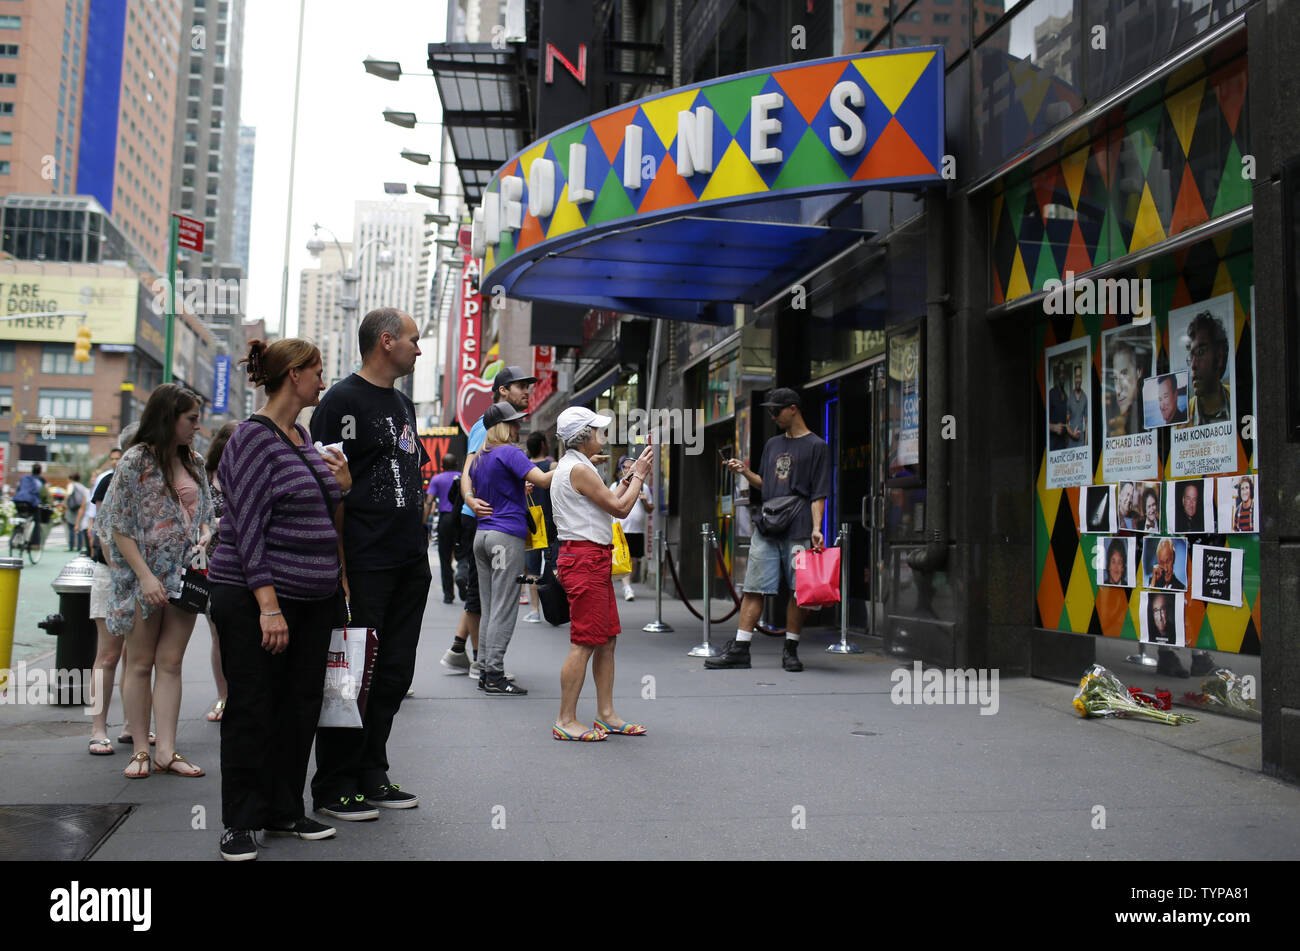 People stop to look at a tribute and memorial of the late Robin Williams at the entrance to Carolines on Broadway comedy club in New York City on August 12, 2014. Robin Williams committed suicide by hanging himself with a belt, the coroner said Tuesday in a press conference detailing the preliminary findings surrounding the actor and comedian's death.          UPI/John Angelillo Stock Photo